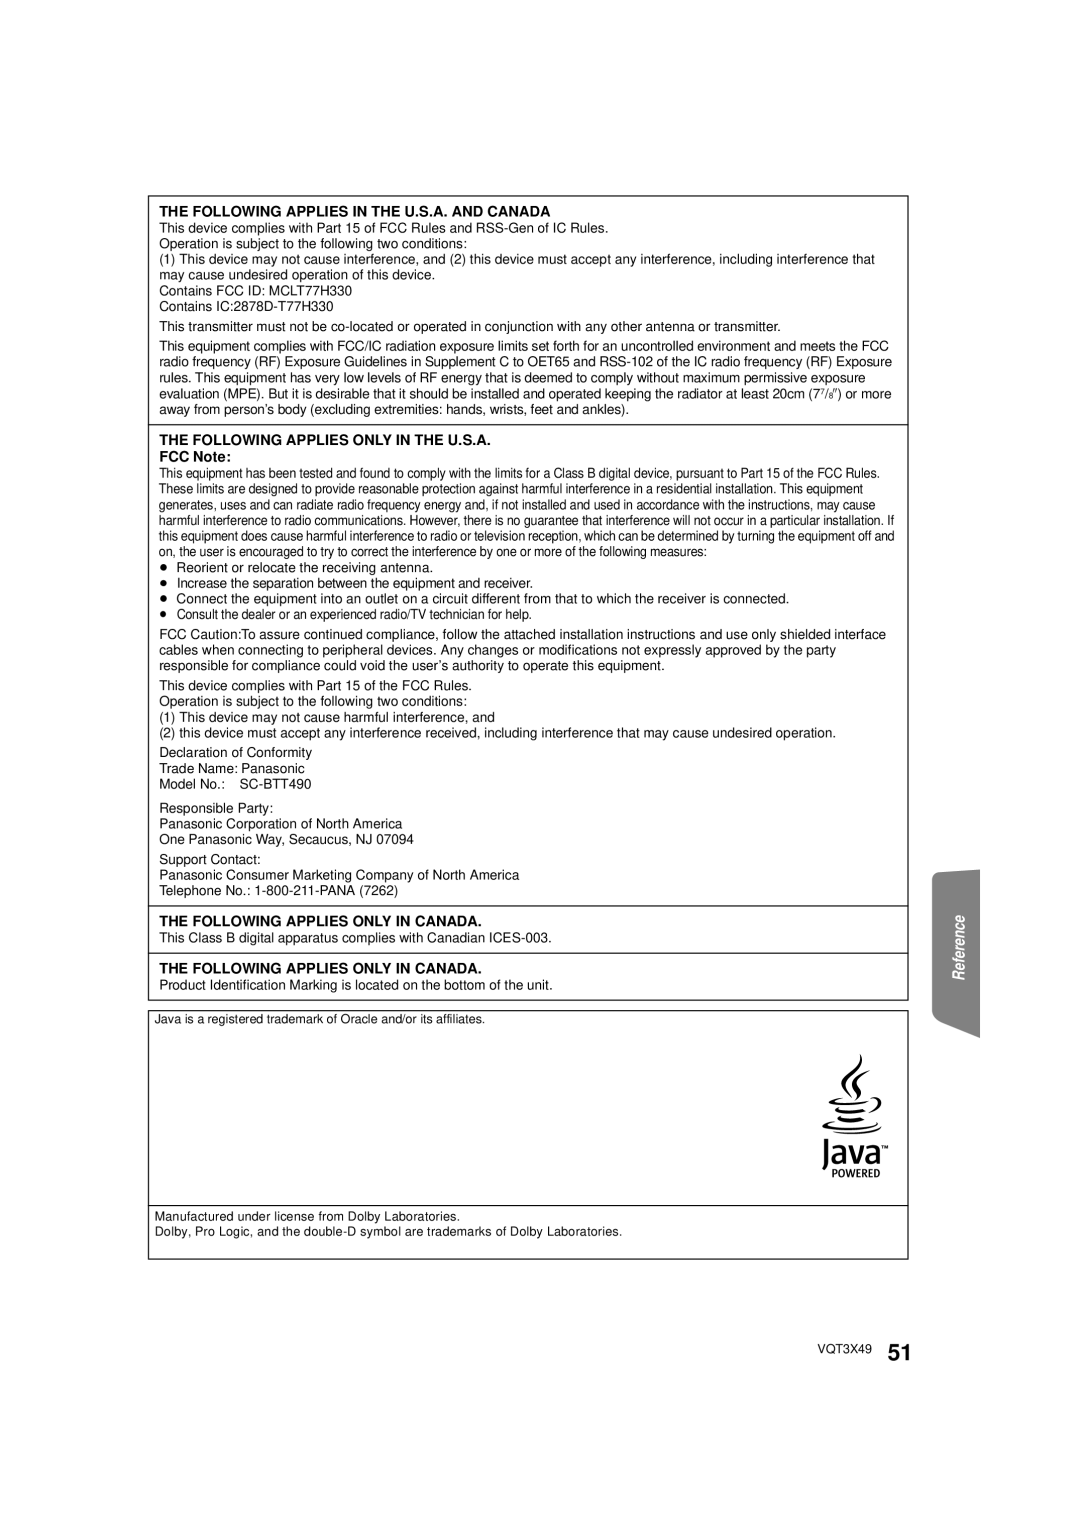 Panasonic SC-BTT490 The Following Applies In The U.S.A. And Canada, THE FOLLOWING APPLIES ONLY IN THE U.S.A FCC Note 